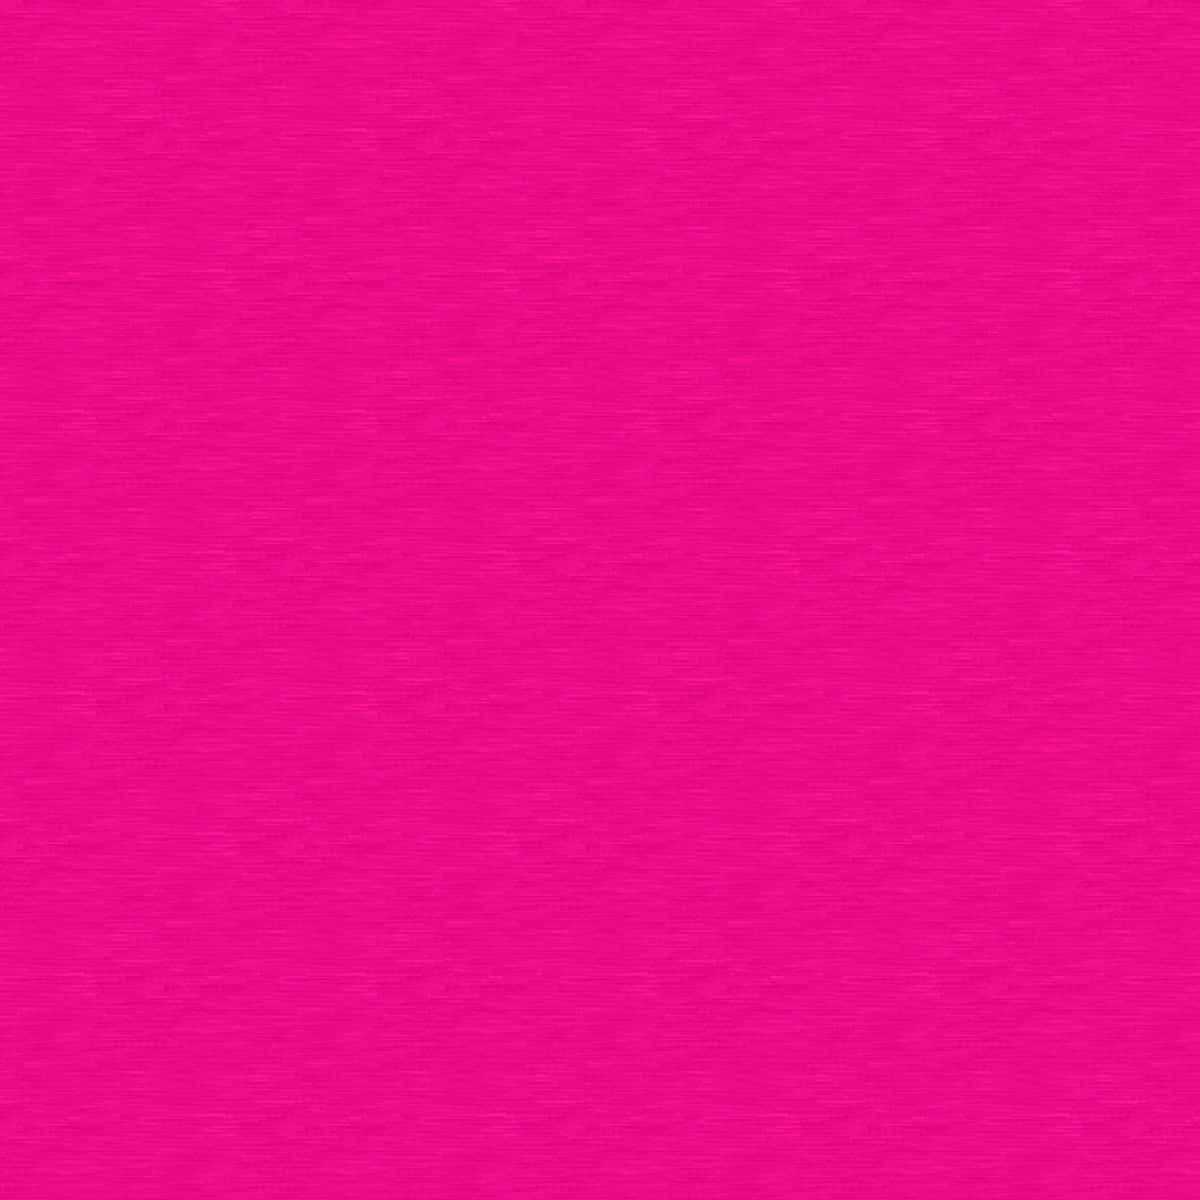 A Pink Background With A Smooth Texture